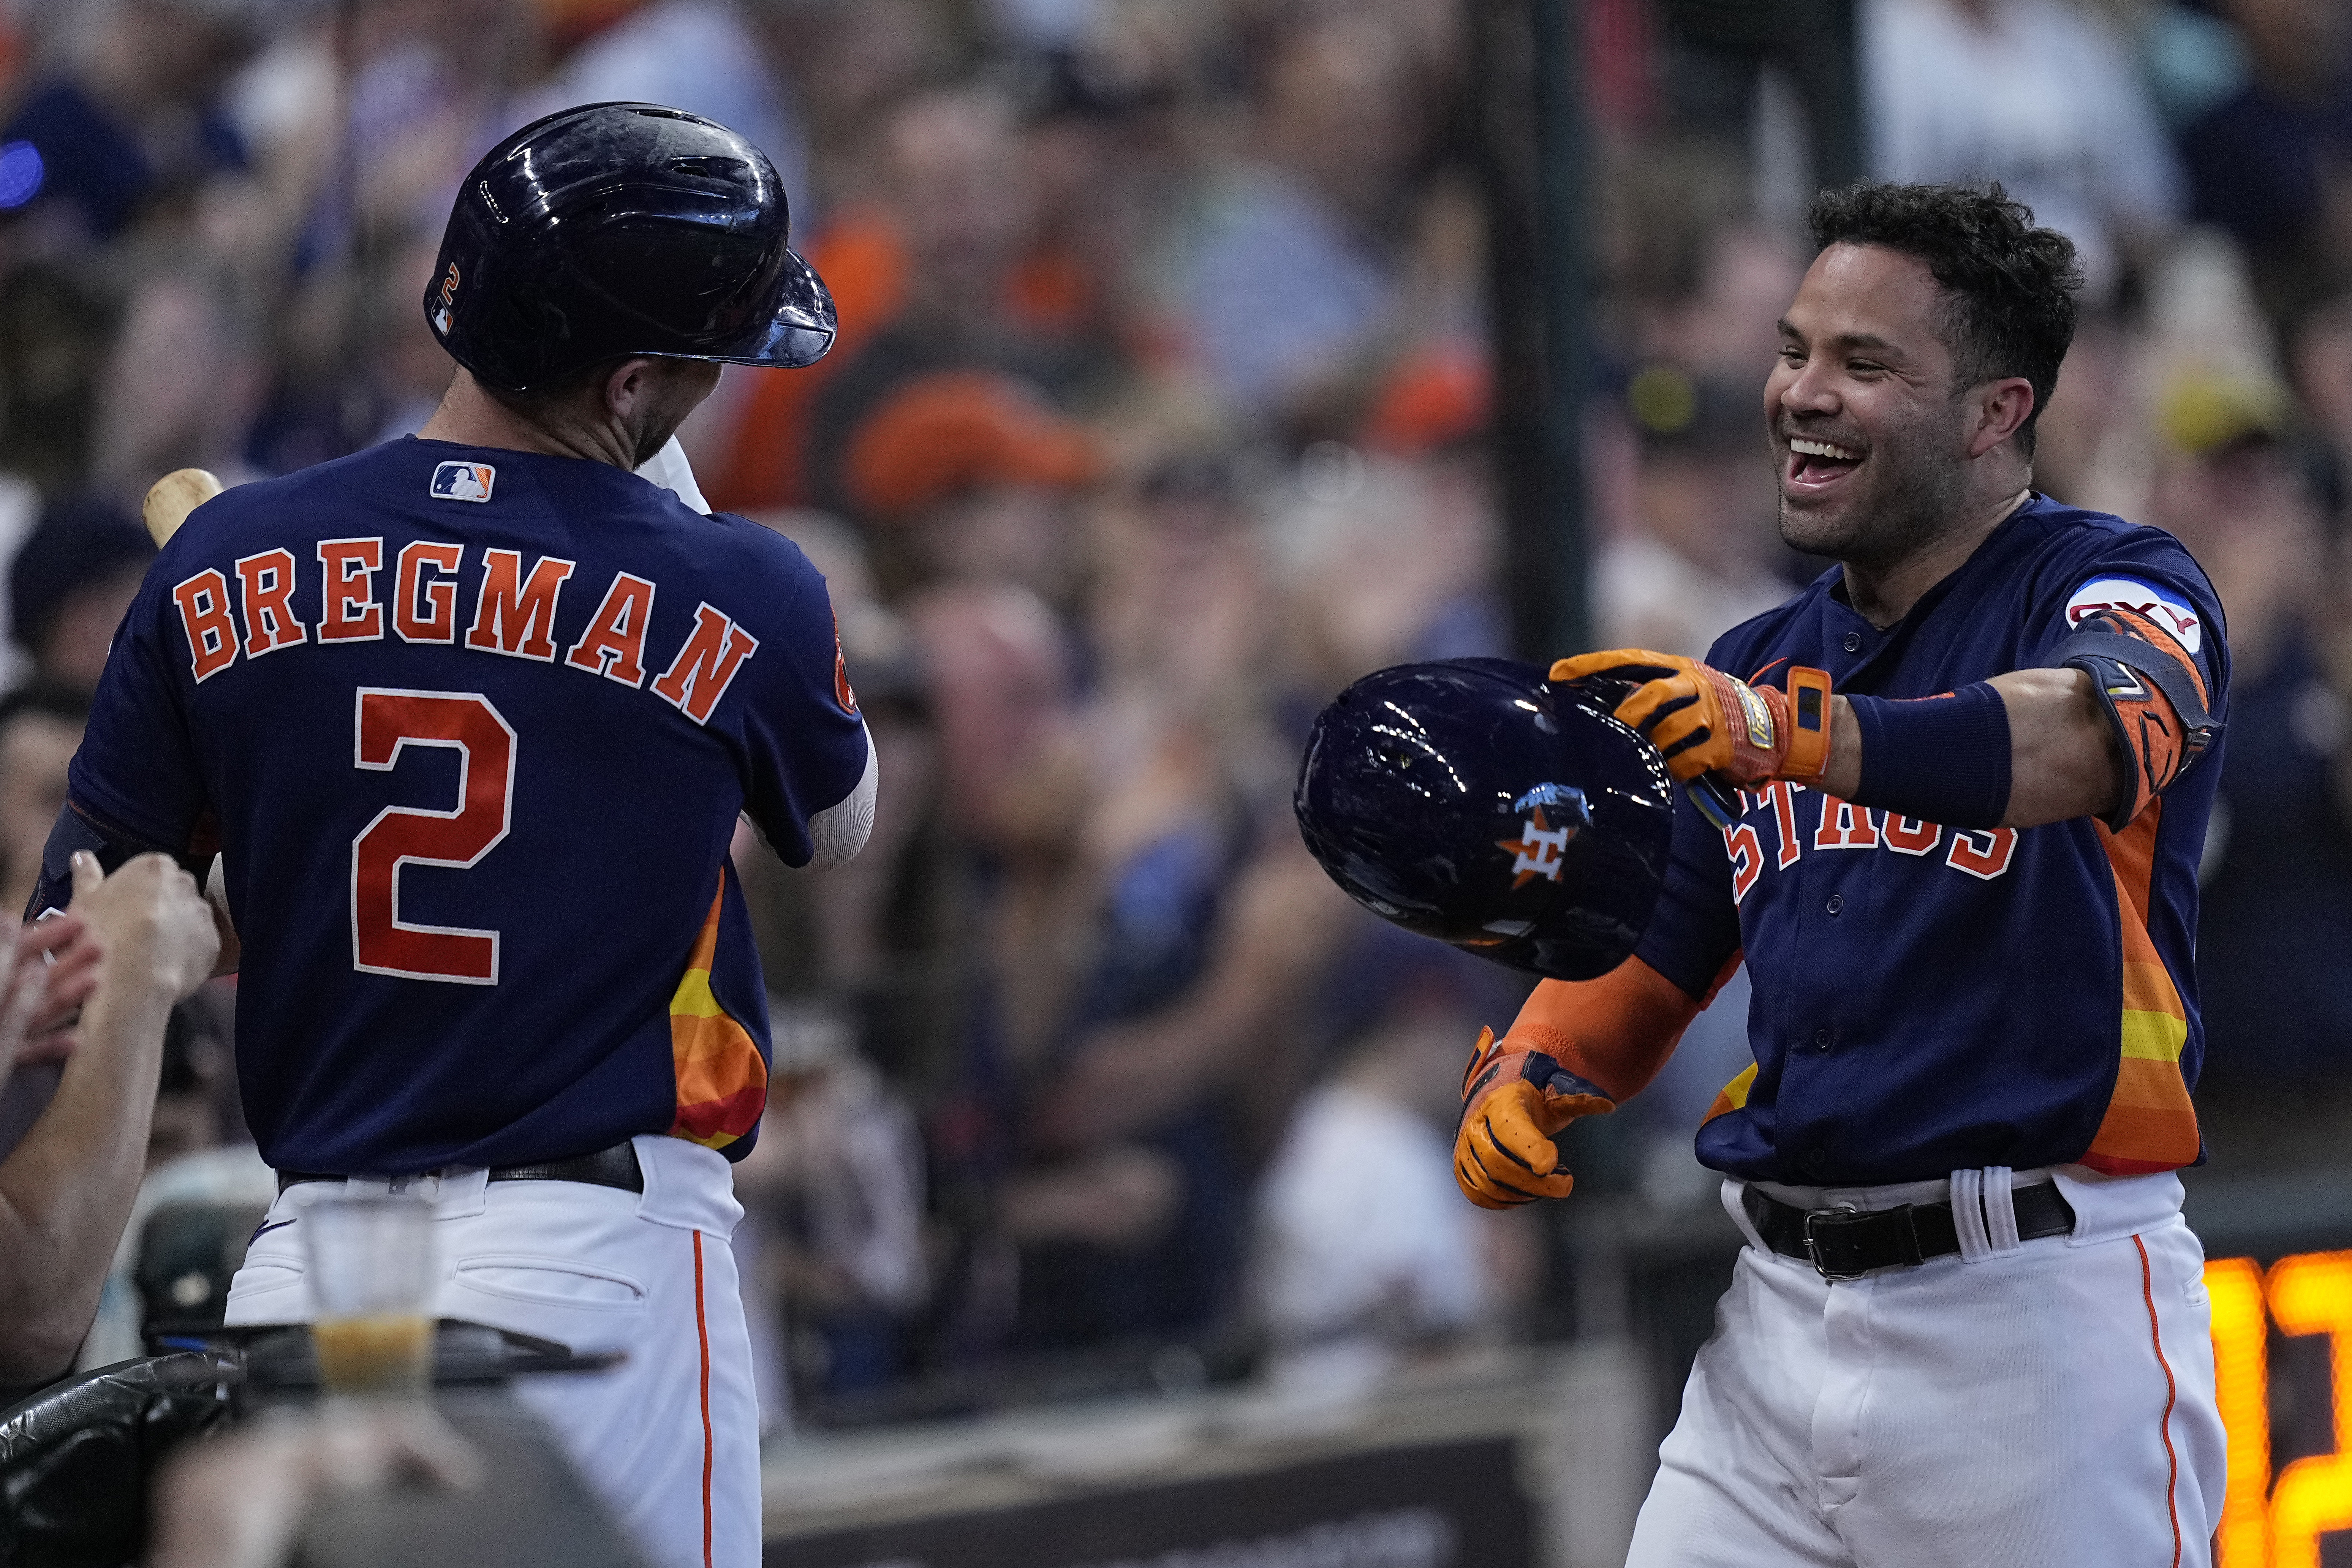 Here's why Astros rising star may surprise the league this season 